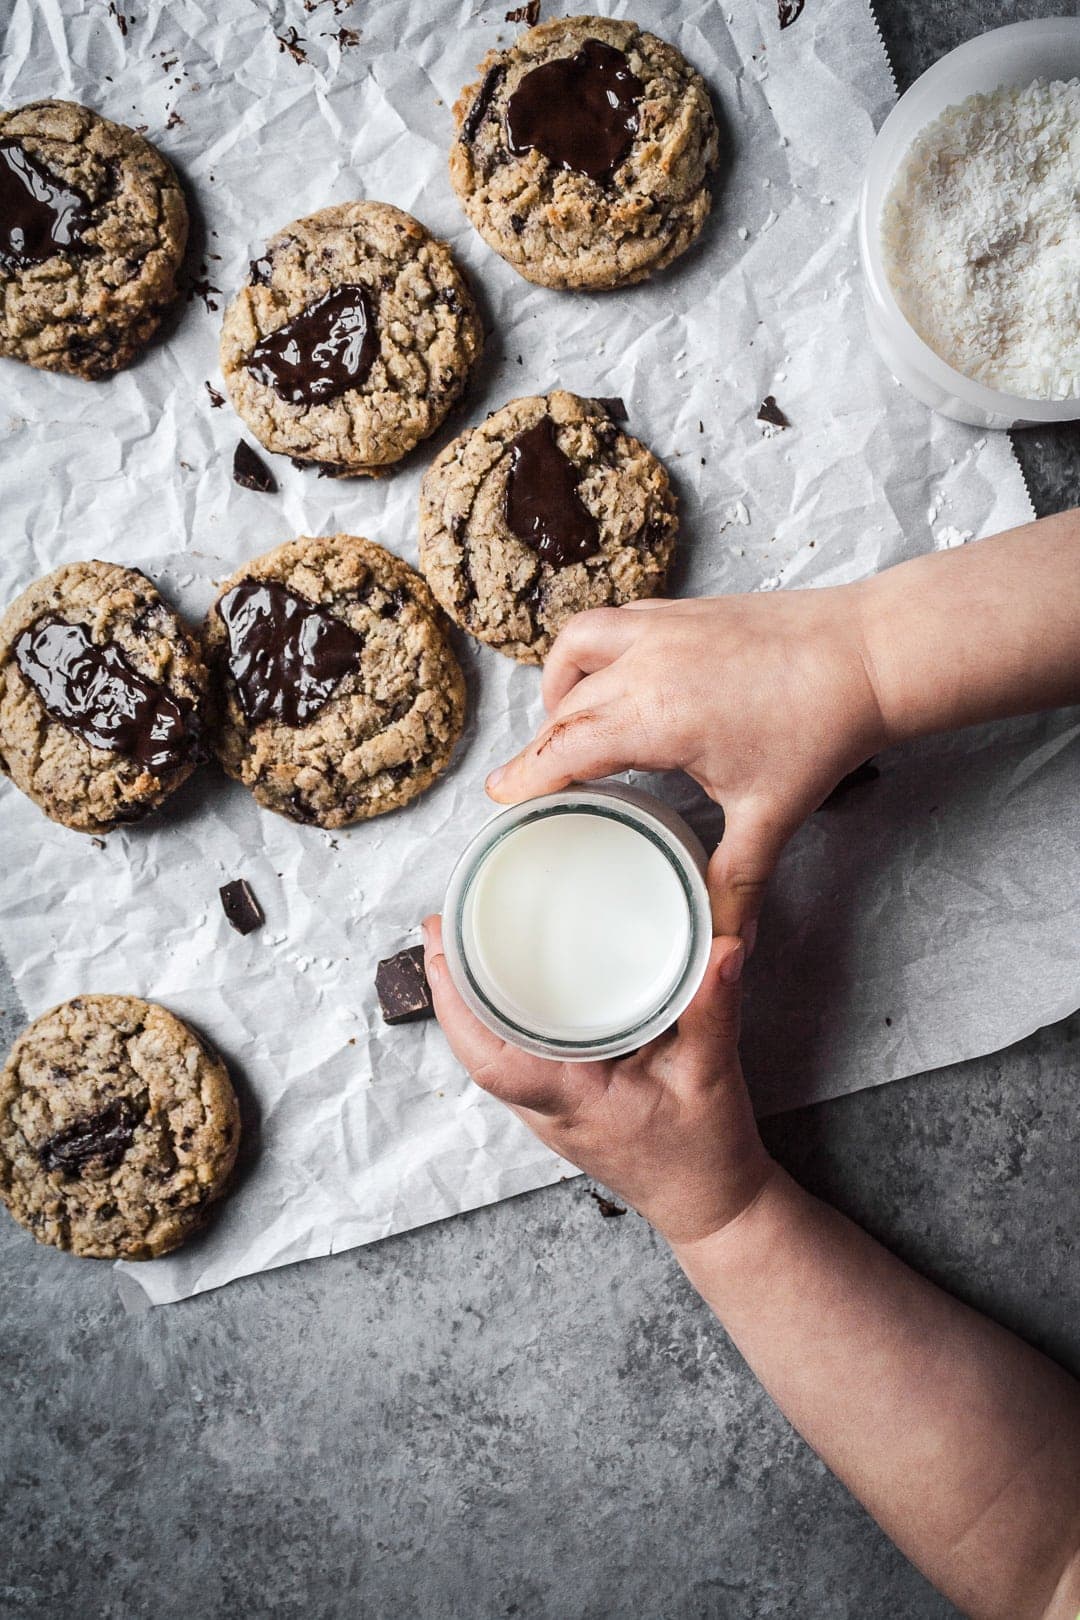 Top view of freshly baked coconut chocolate chip cookies with a child's hands holding a glass of milk